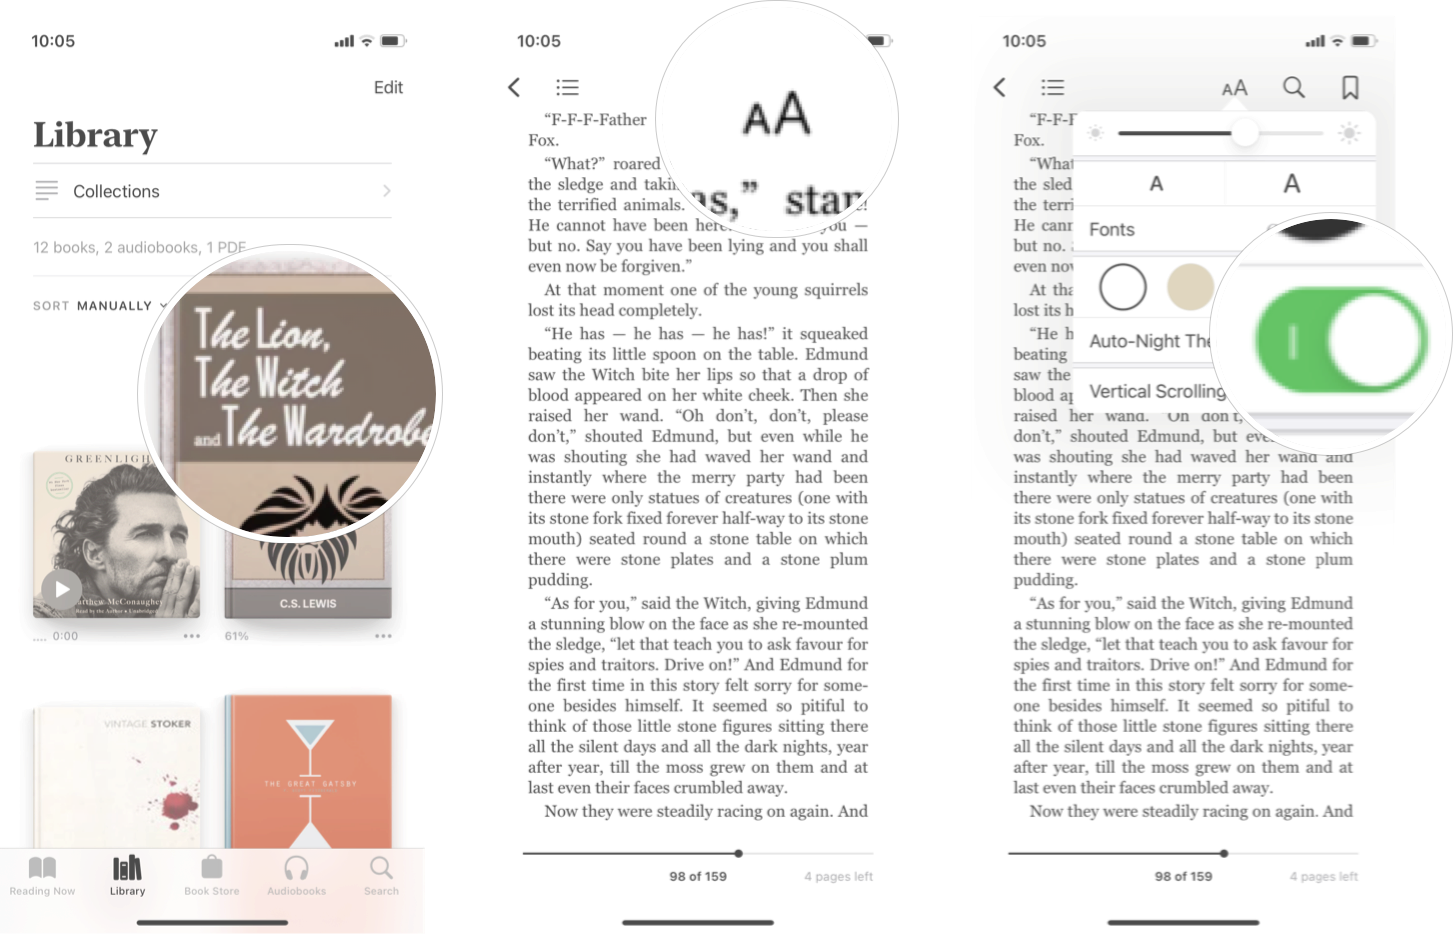 Change Auto Night Feature In Books In iOS 15: Launch the books app, tap the book you want, tap the appearance button, and then tap the auto-night on/off switch.